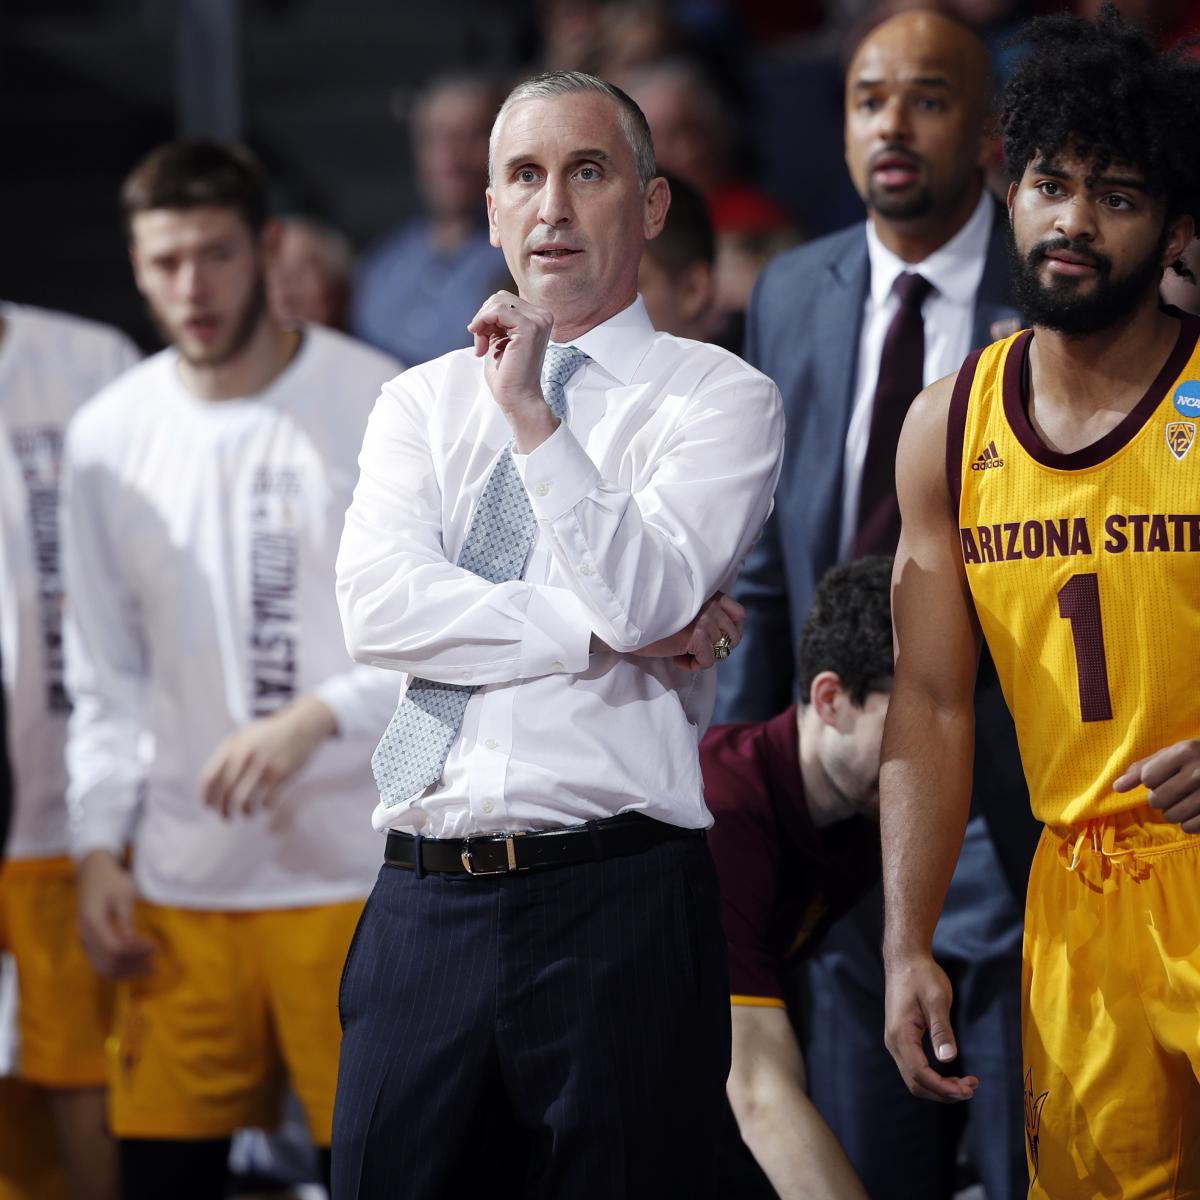 Arizona State's Bobby Hurley fined, suspended after confrontation - NBC  Sports